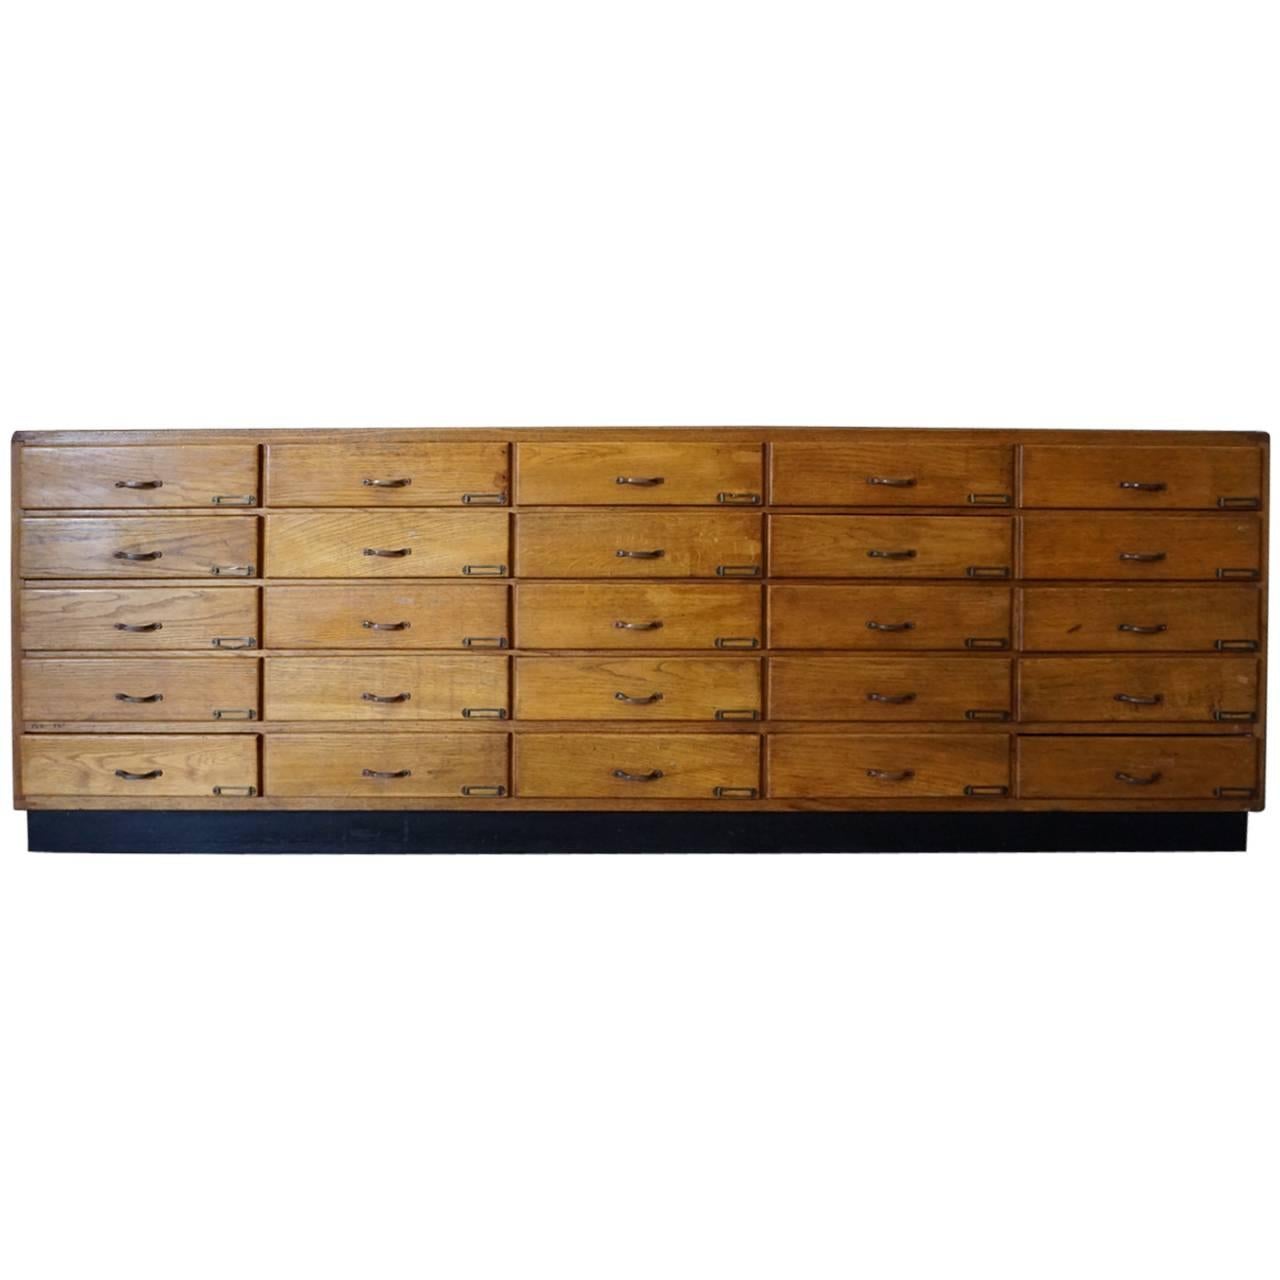 Vintage German Oak Apothecary Bank of Drawers, 1950s